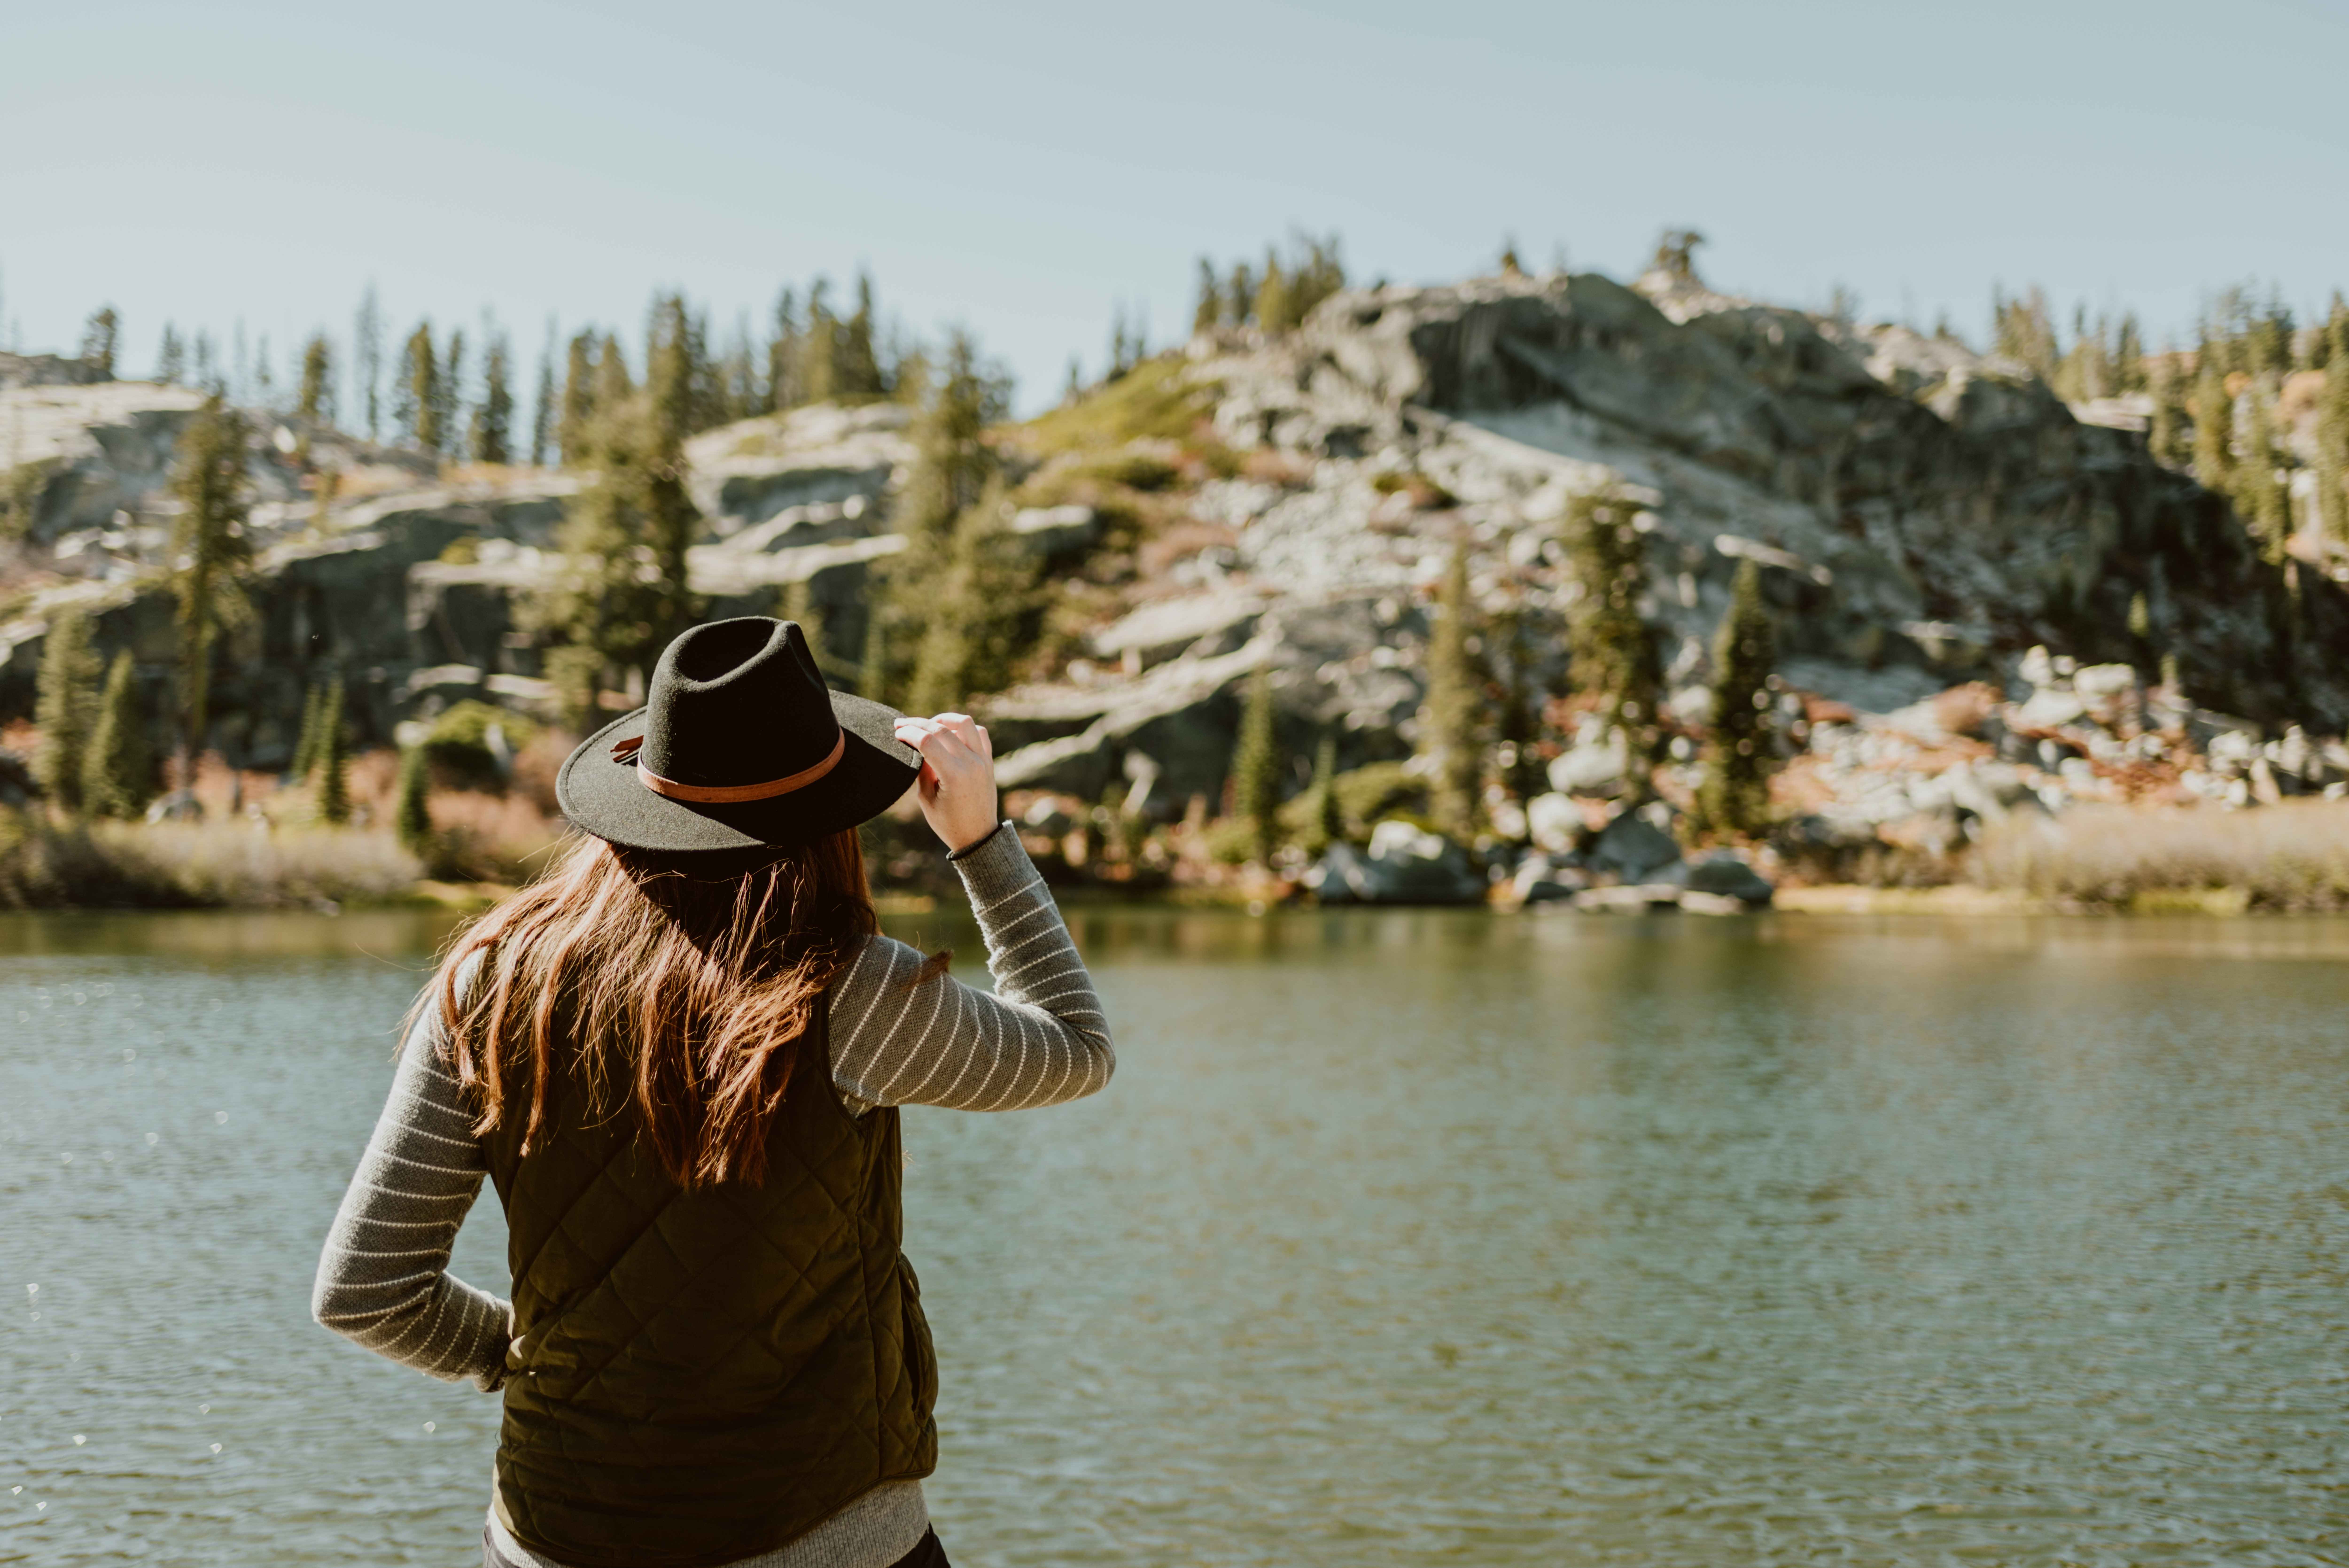 A woman stands at the edge of an alpine lake, looking out at the view with a hand holding onto her hat.

Workflows, shworkflows... You've got everything under control -- right? Click here to find out if you need a workflow makeover.